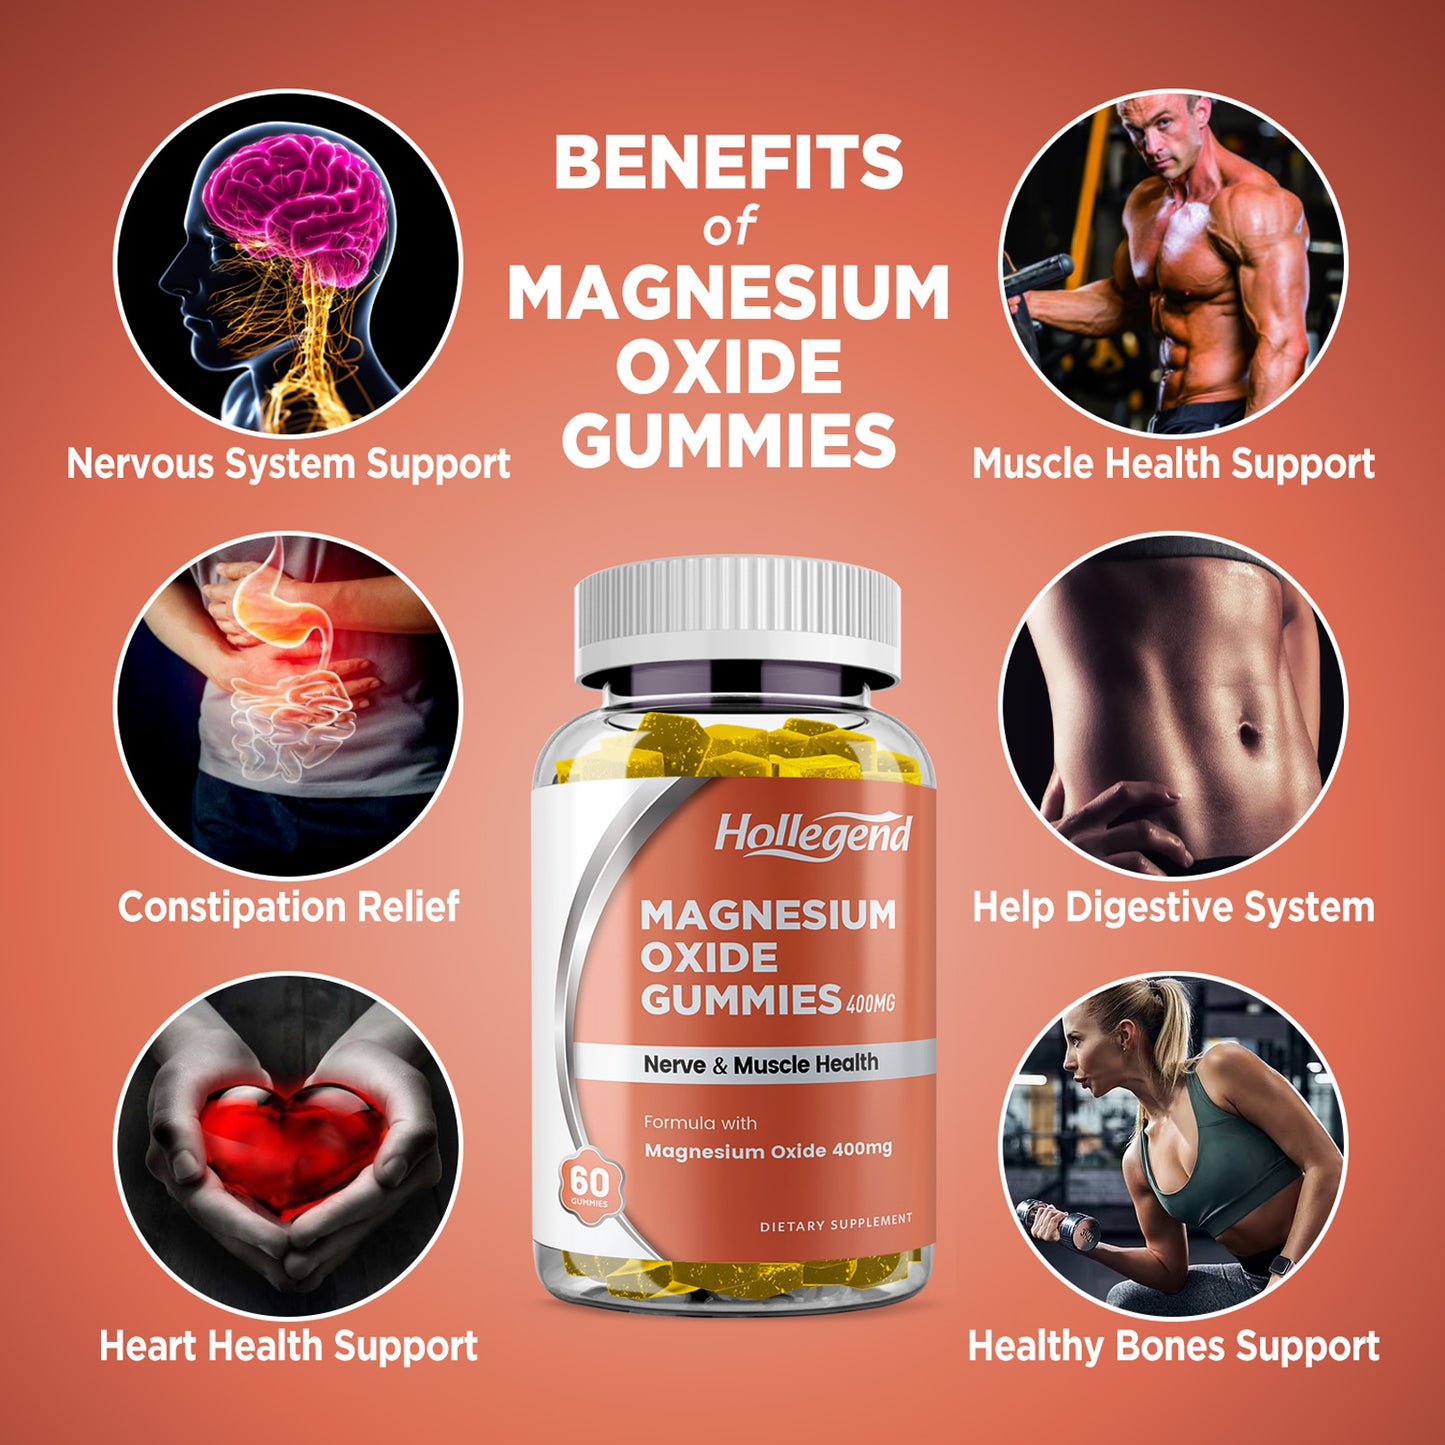 Magnesium Oxide 400mg Gummies, Magnesium Oxide Chewable Supplement for Muscle, Nerve & Heart Health, Vegan, Pinapple Flavor, 60 Count